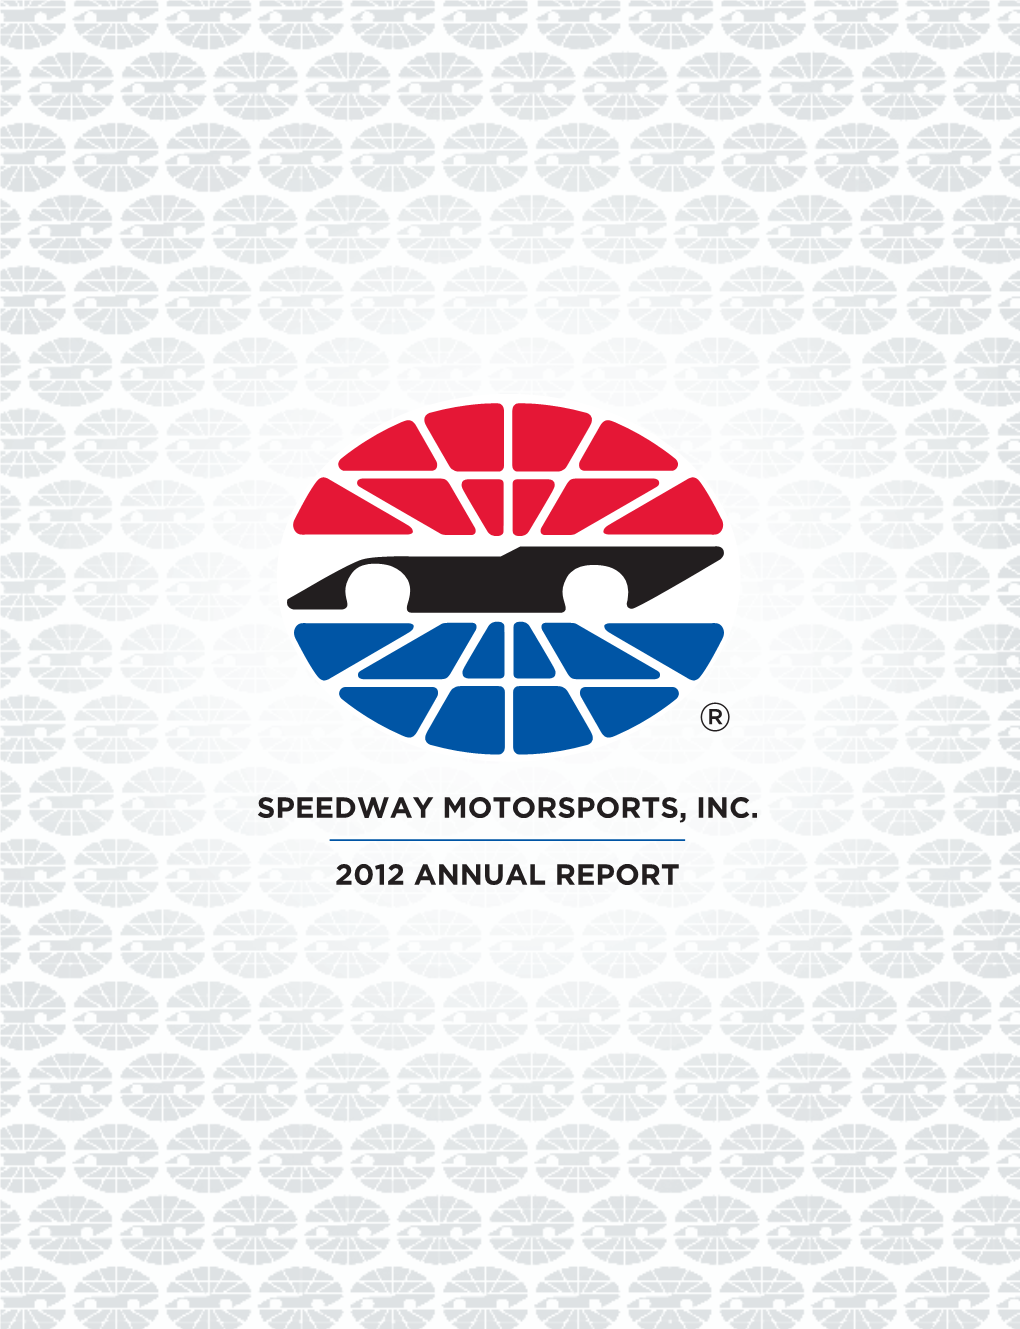 Speedway Motorsports, Inc. | 2012 Annual Report Speedway Motorsports, Inc. | 2012 Annual Report Speedway Motorsports, Inc